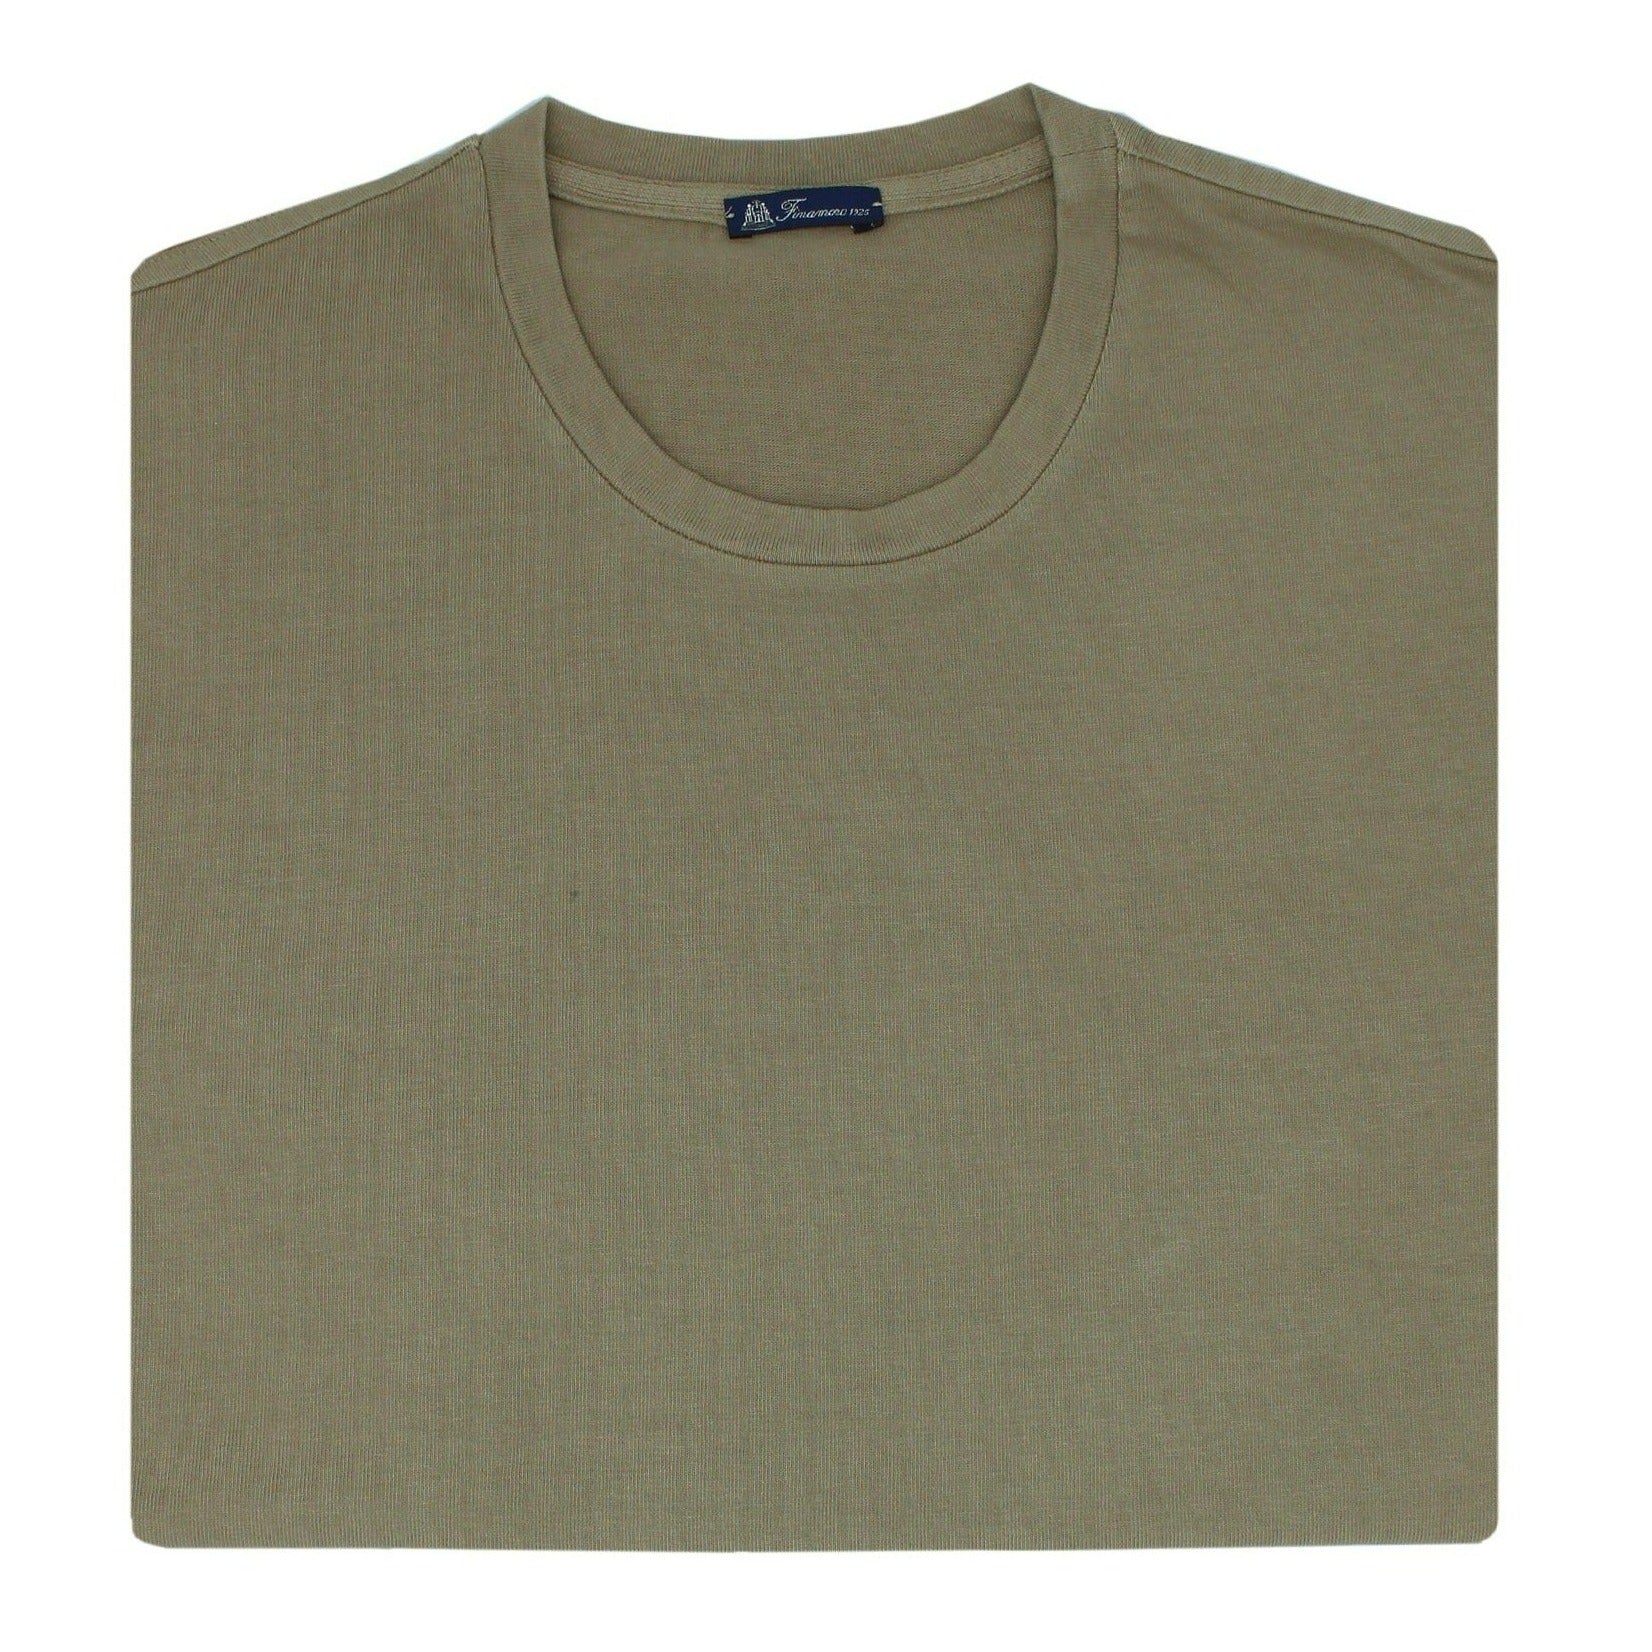 Beige garment dyed cotton T-shirt with Finamore 1925 logo